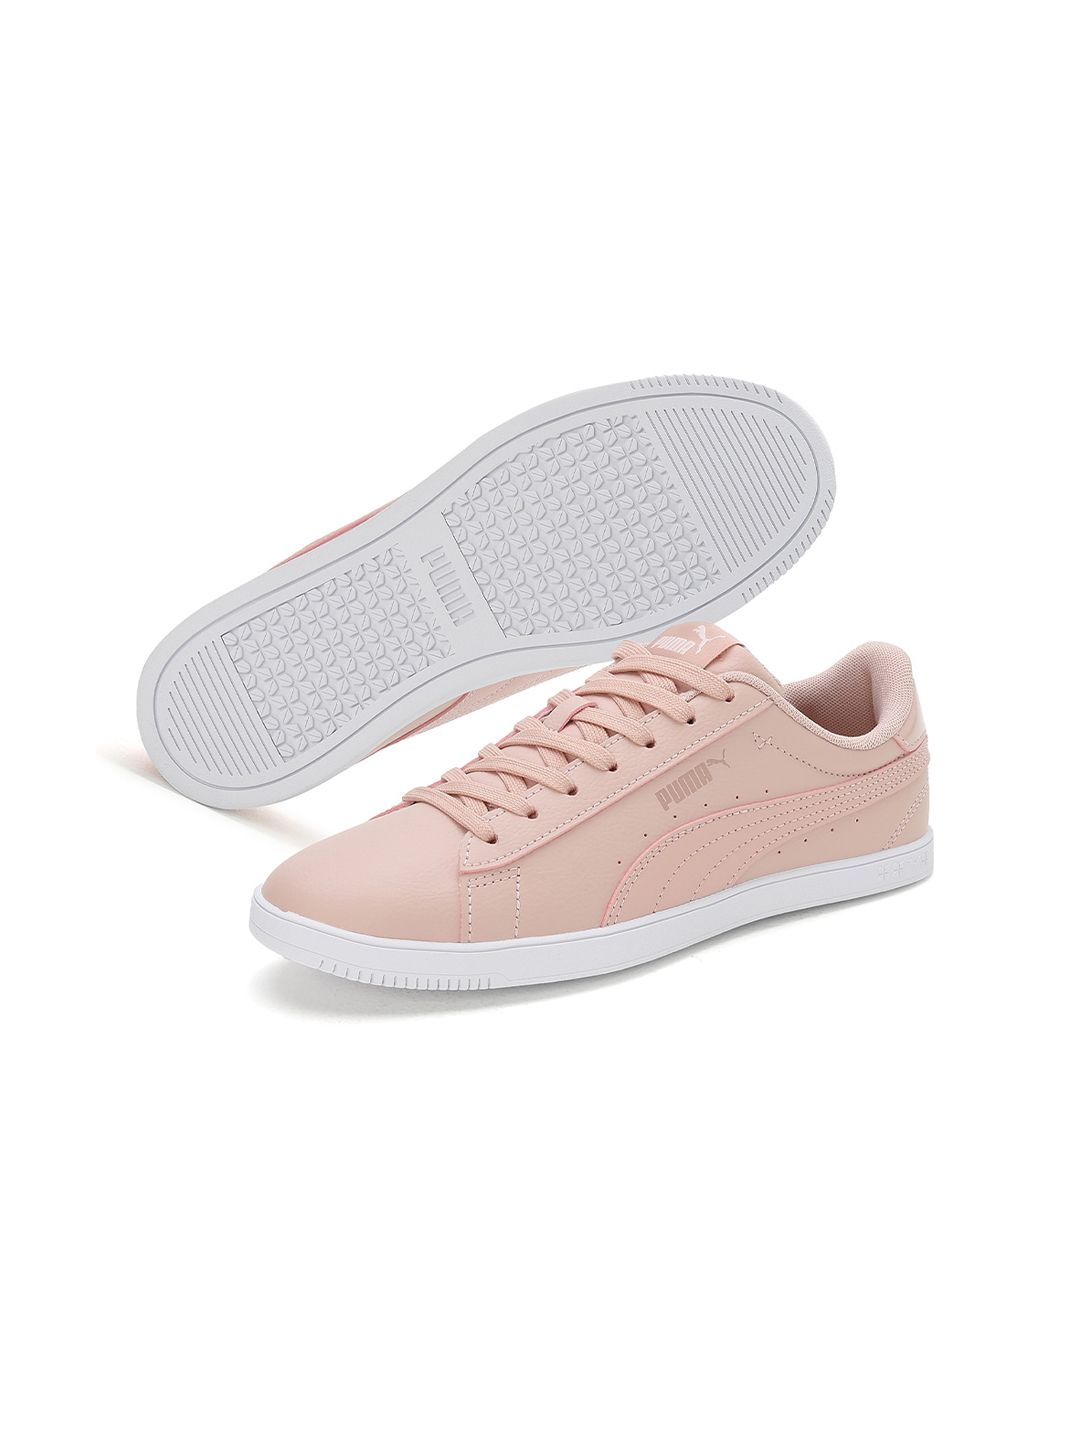 Puma Women Rose Pink Solid Casual Sneakers Shoes Price in India